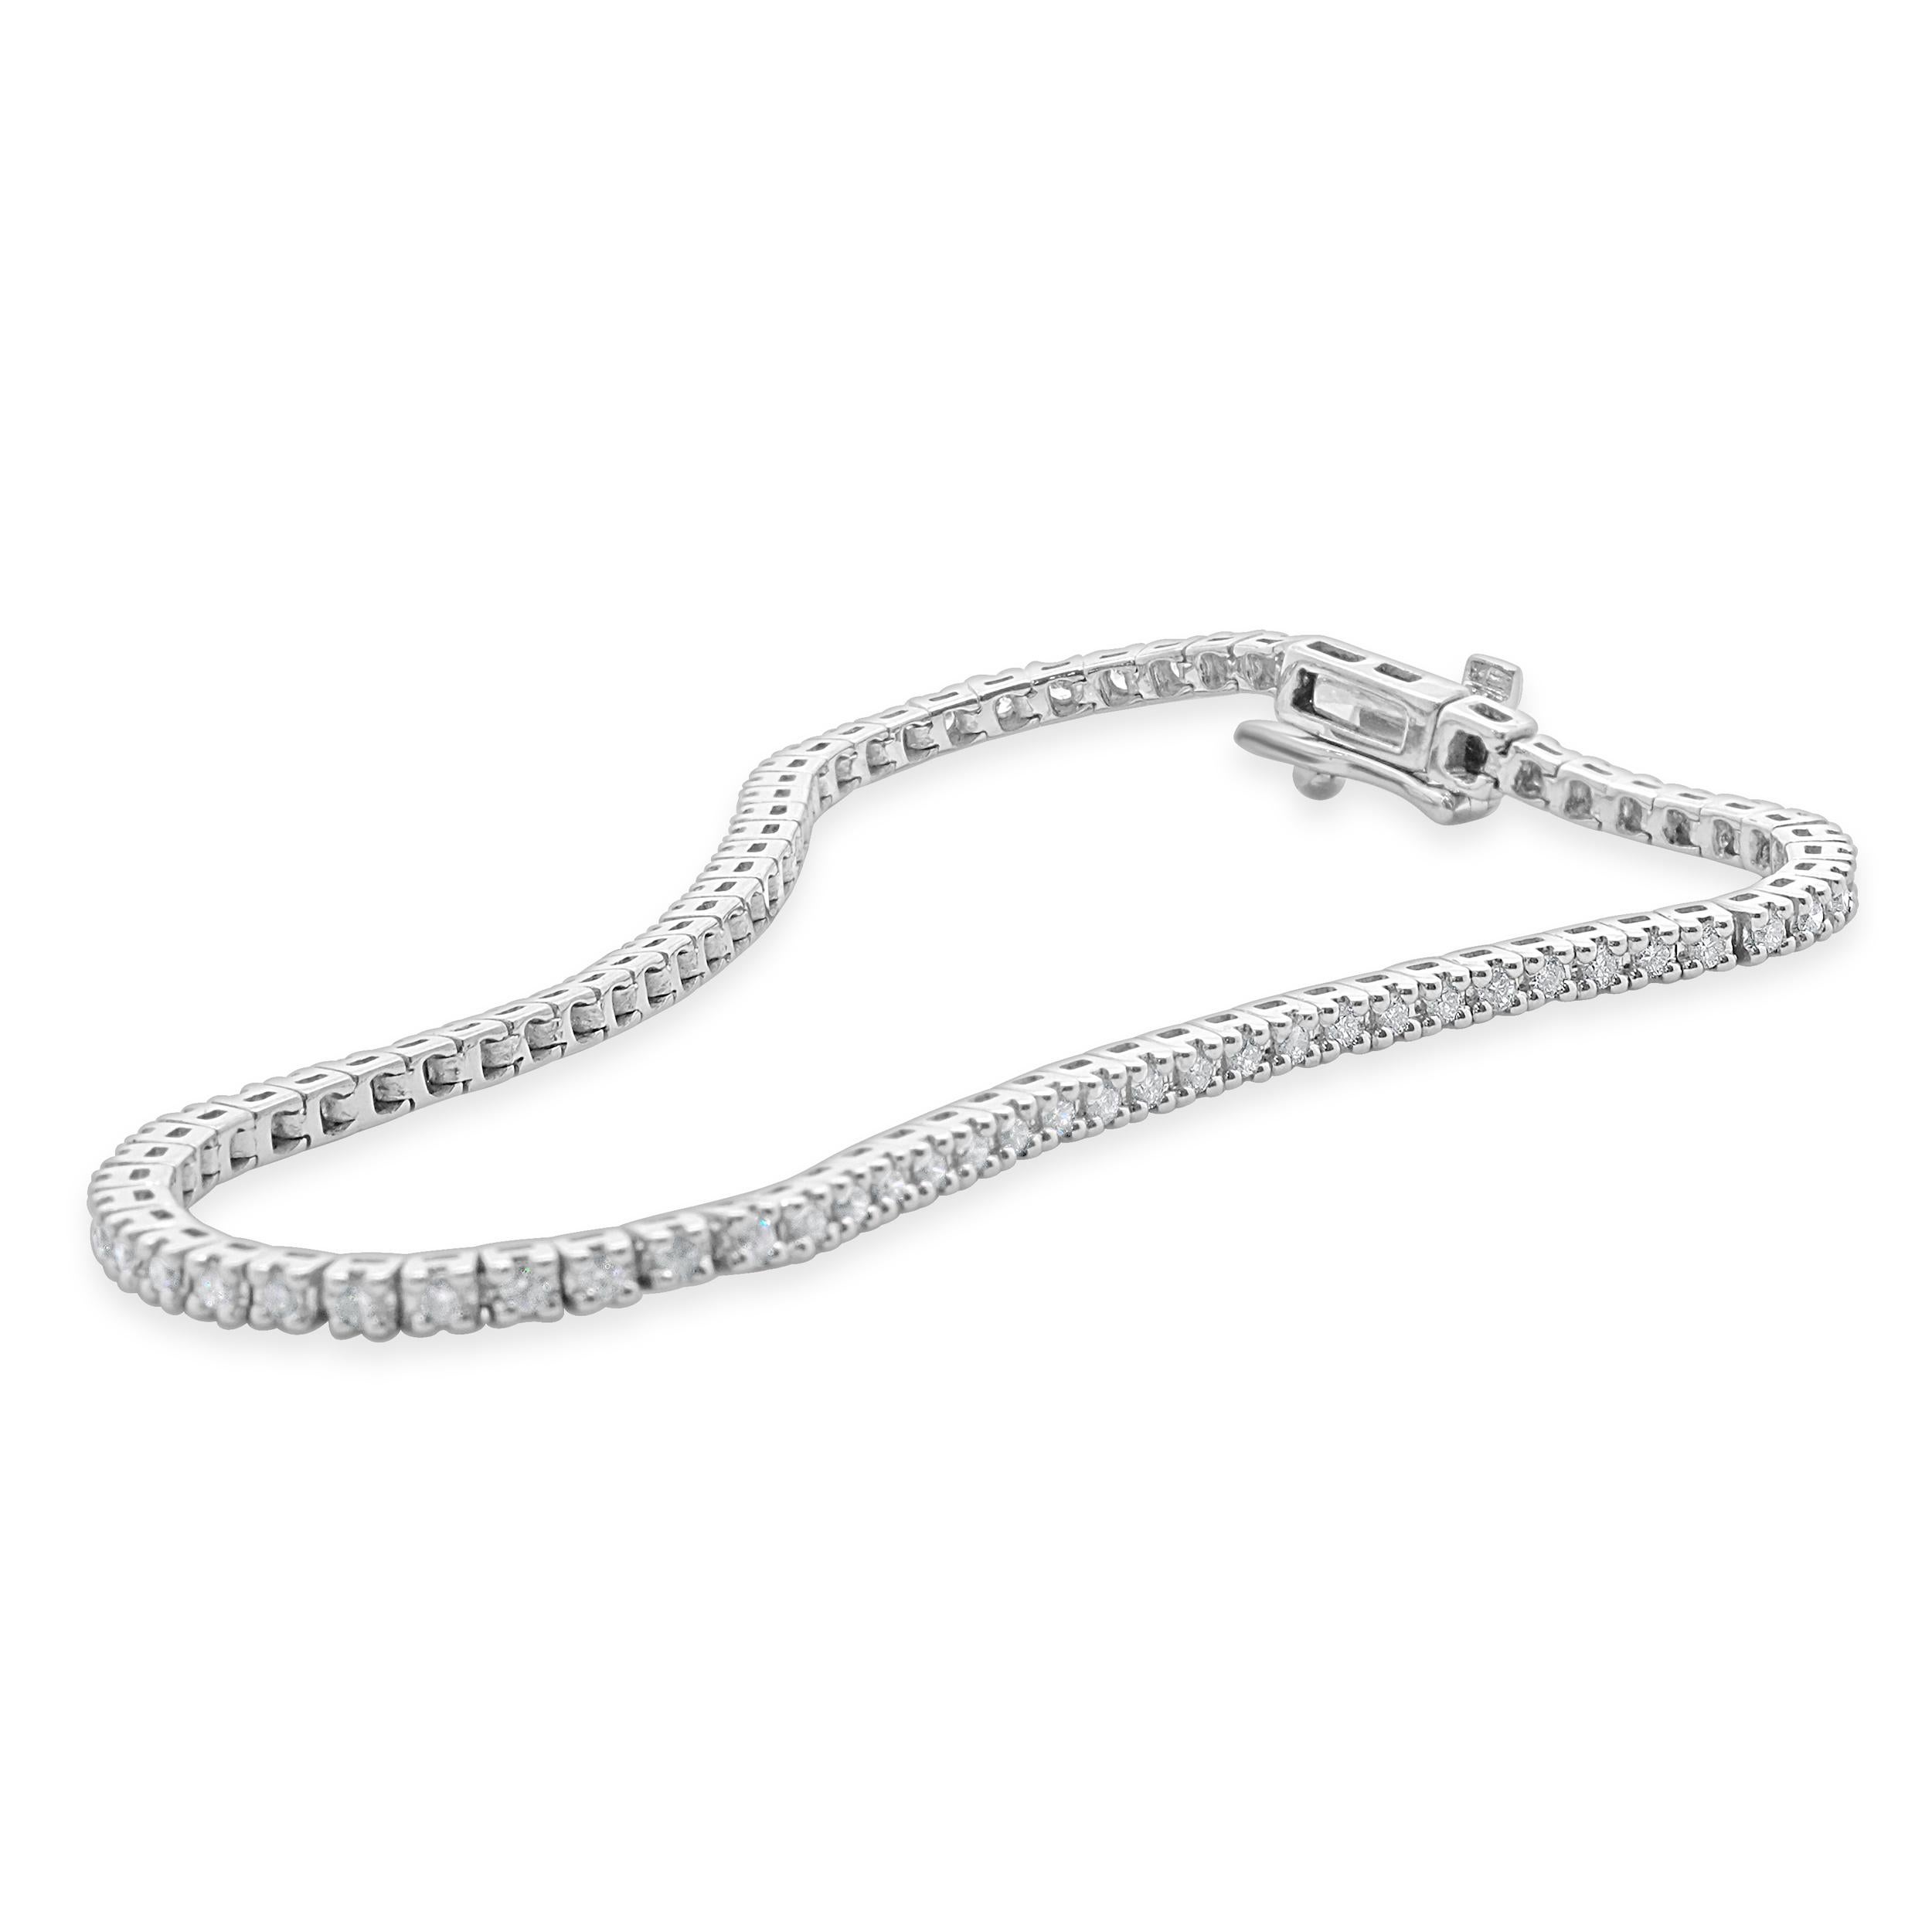 Designer: custom
Material: 14K white gold
Diamond: 79 round brilliant cut = 0.94cttw
Color: G
Clarity: SI1-2
Dimensions: bracelet will fit up to a 7-inch wrist
Weight: 7.30 grams